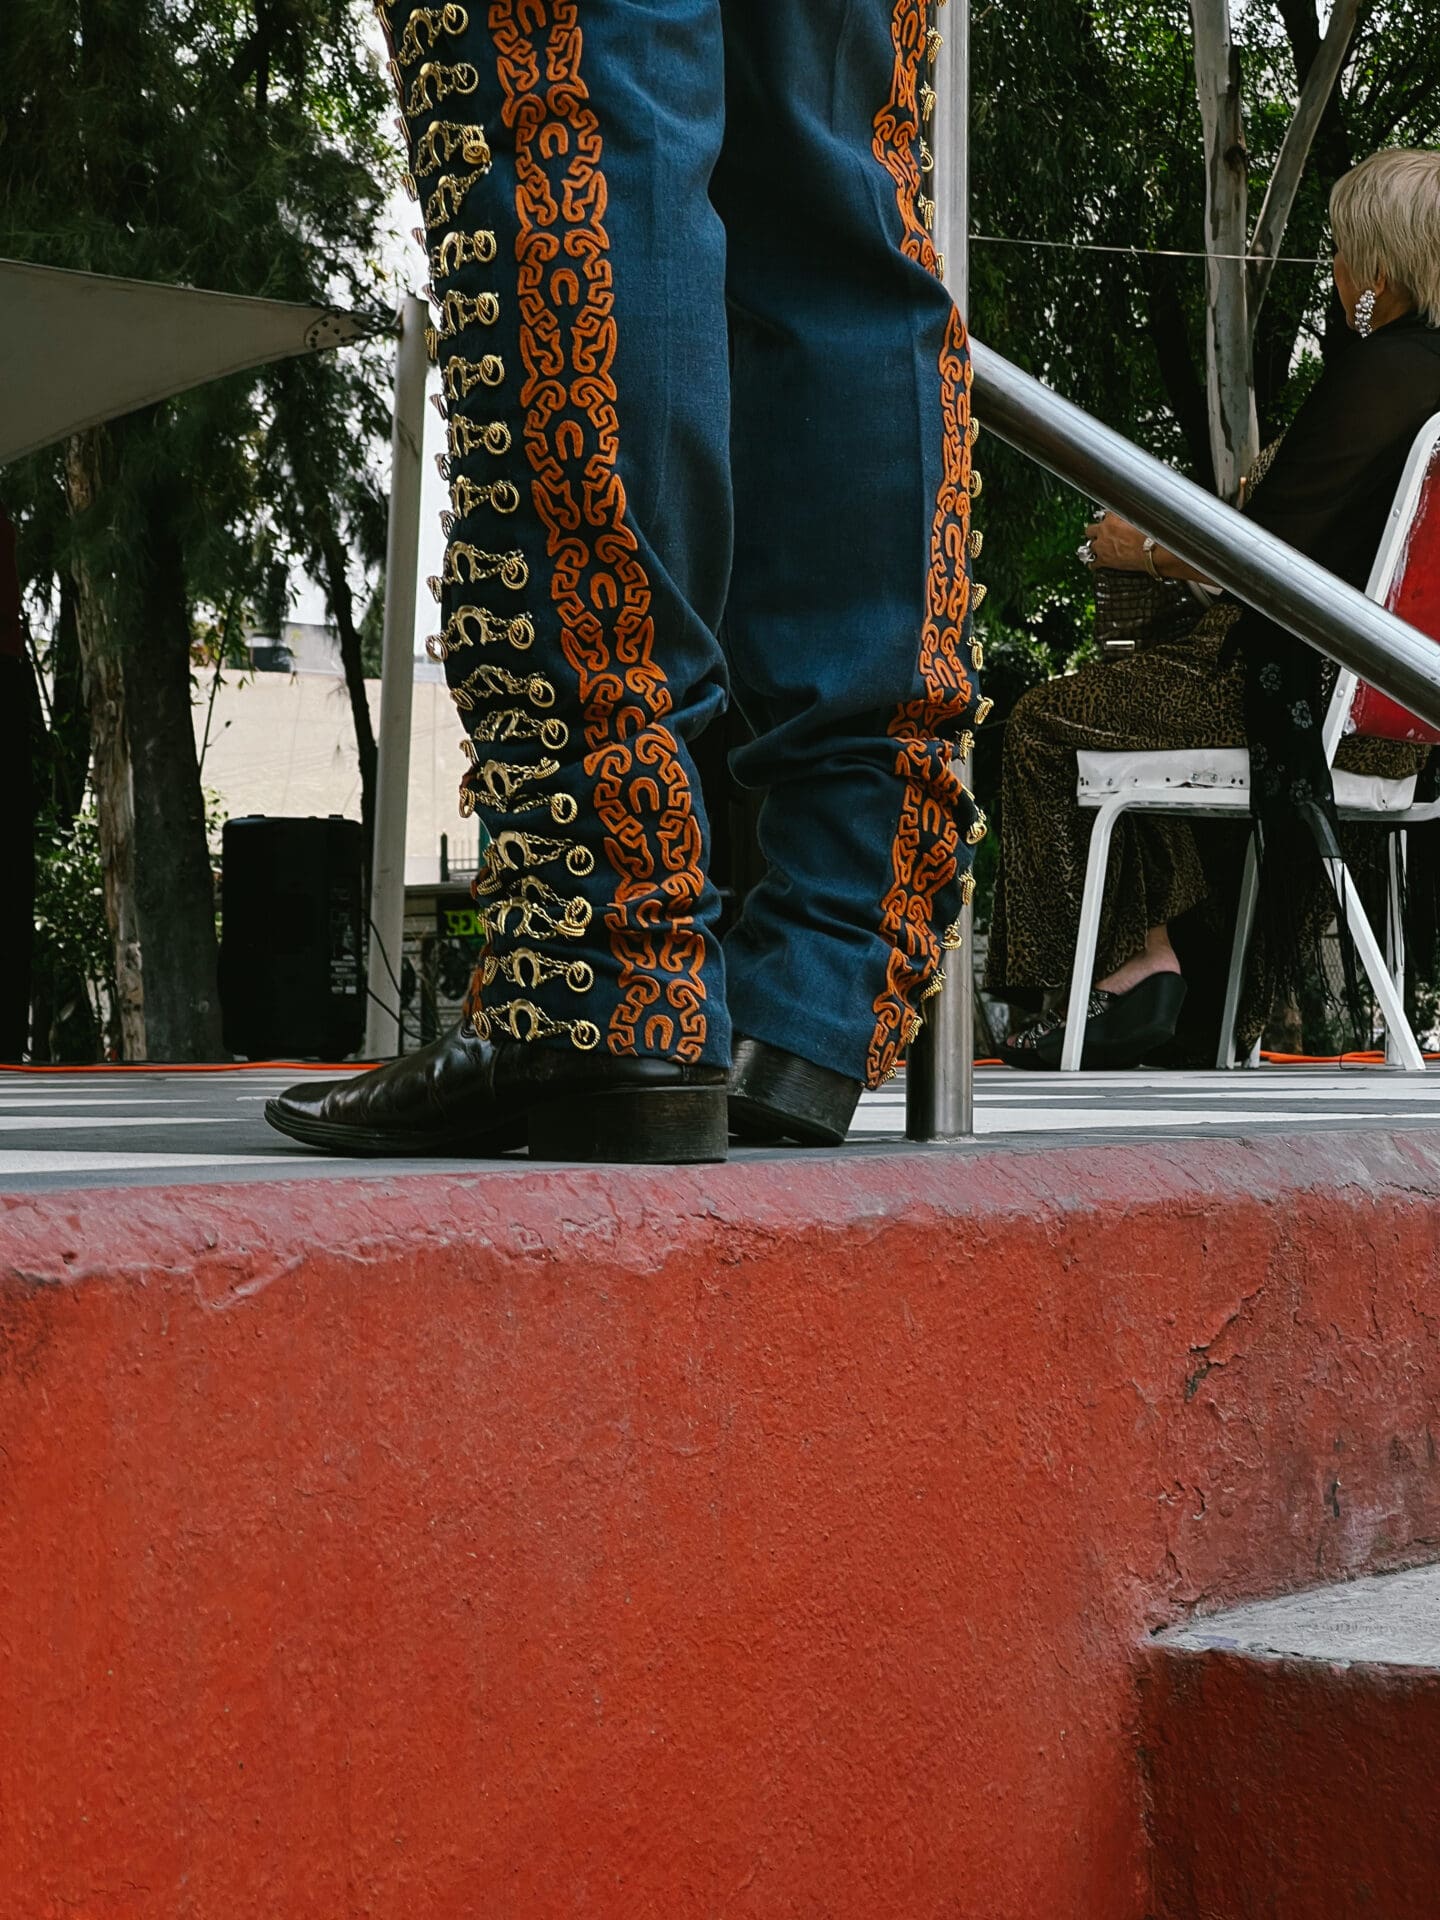 Photographer Manuel Zúñiga on Mexico City | a man wearing classic Mexican trousers, blue and with orange and yellow patterns, stands on a red-painted wall